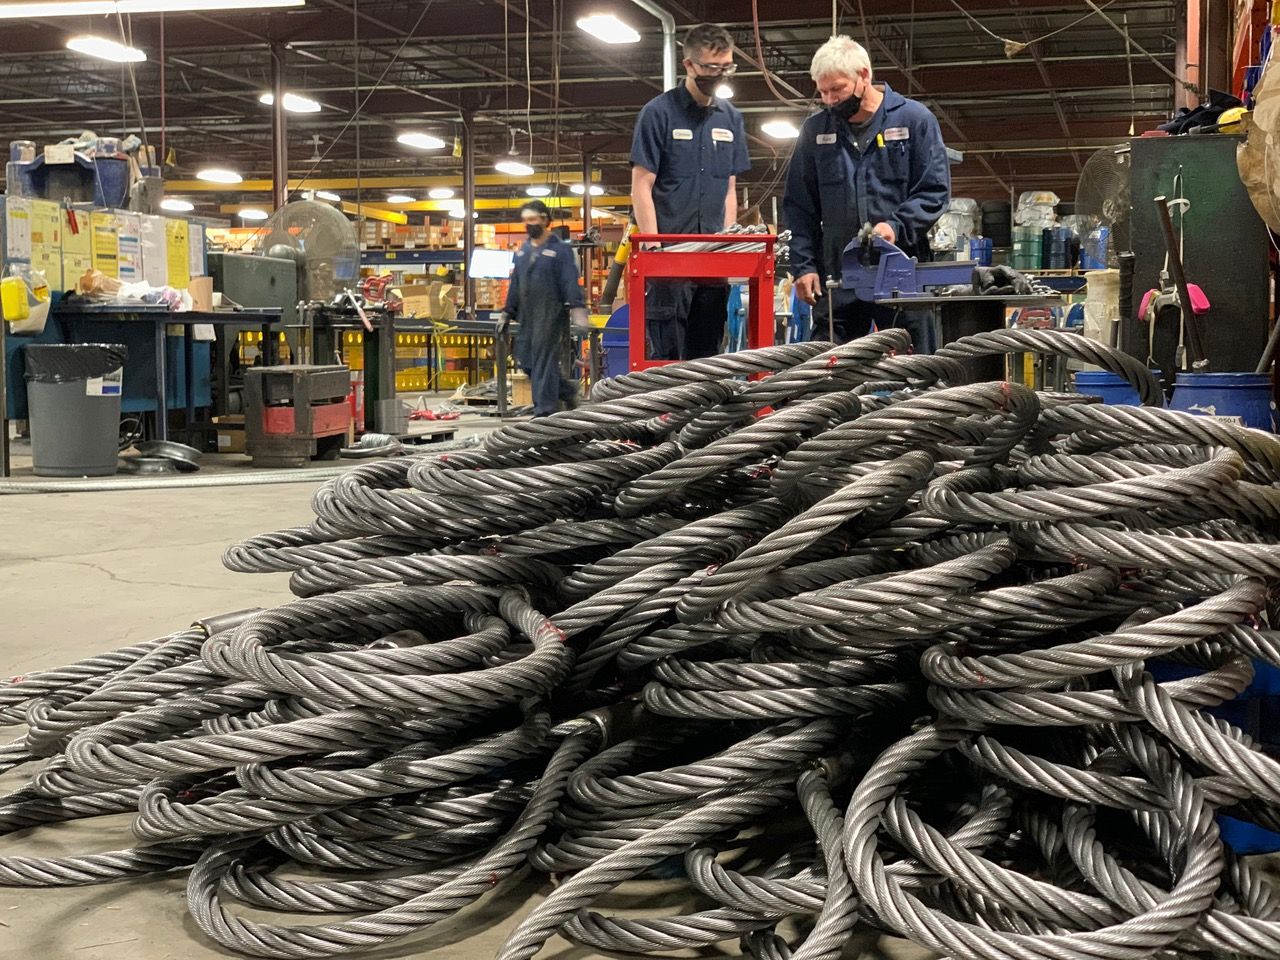 Unirope is a specialist in the manufacture, distribution, testing, certification, and inspection of high-performance wire rope and rigging products.